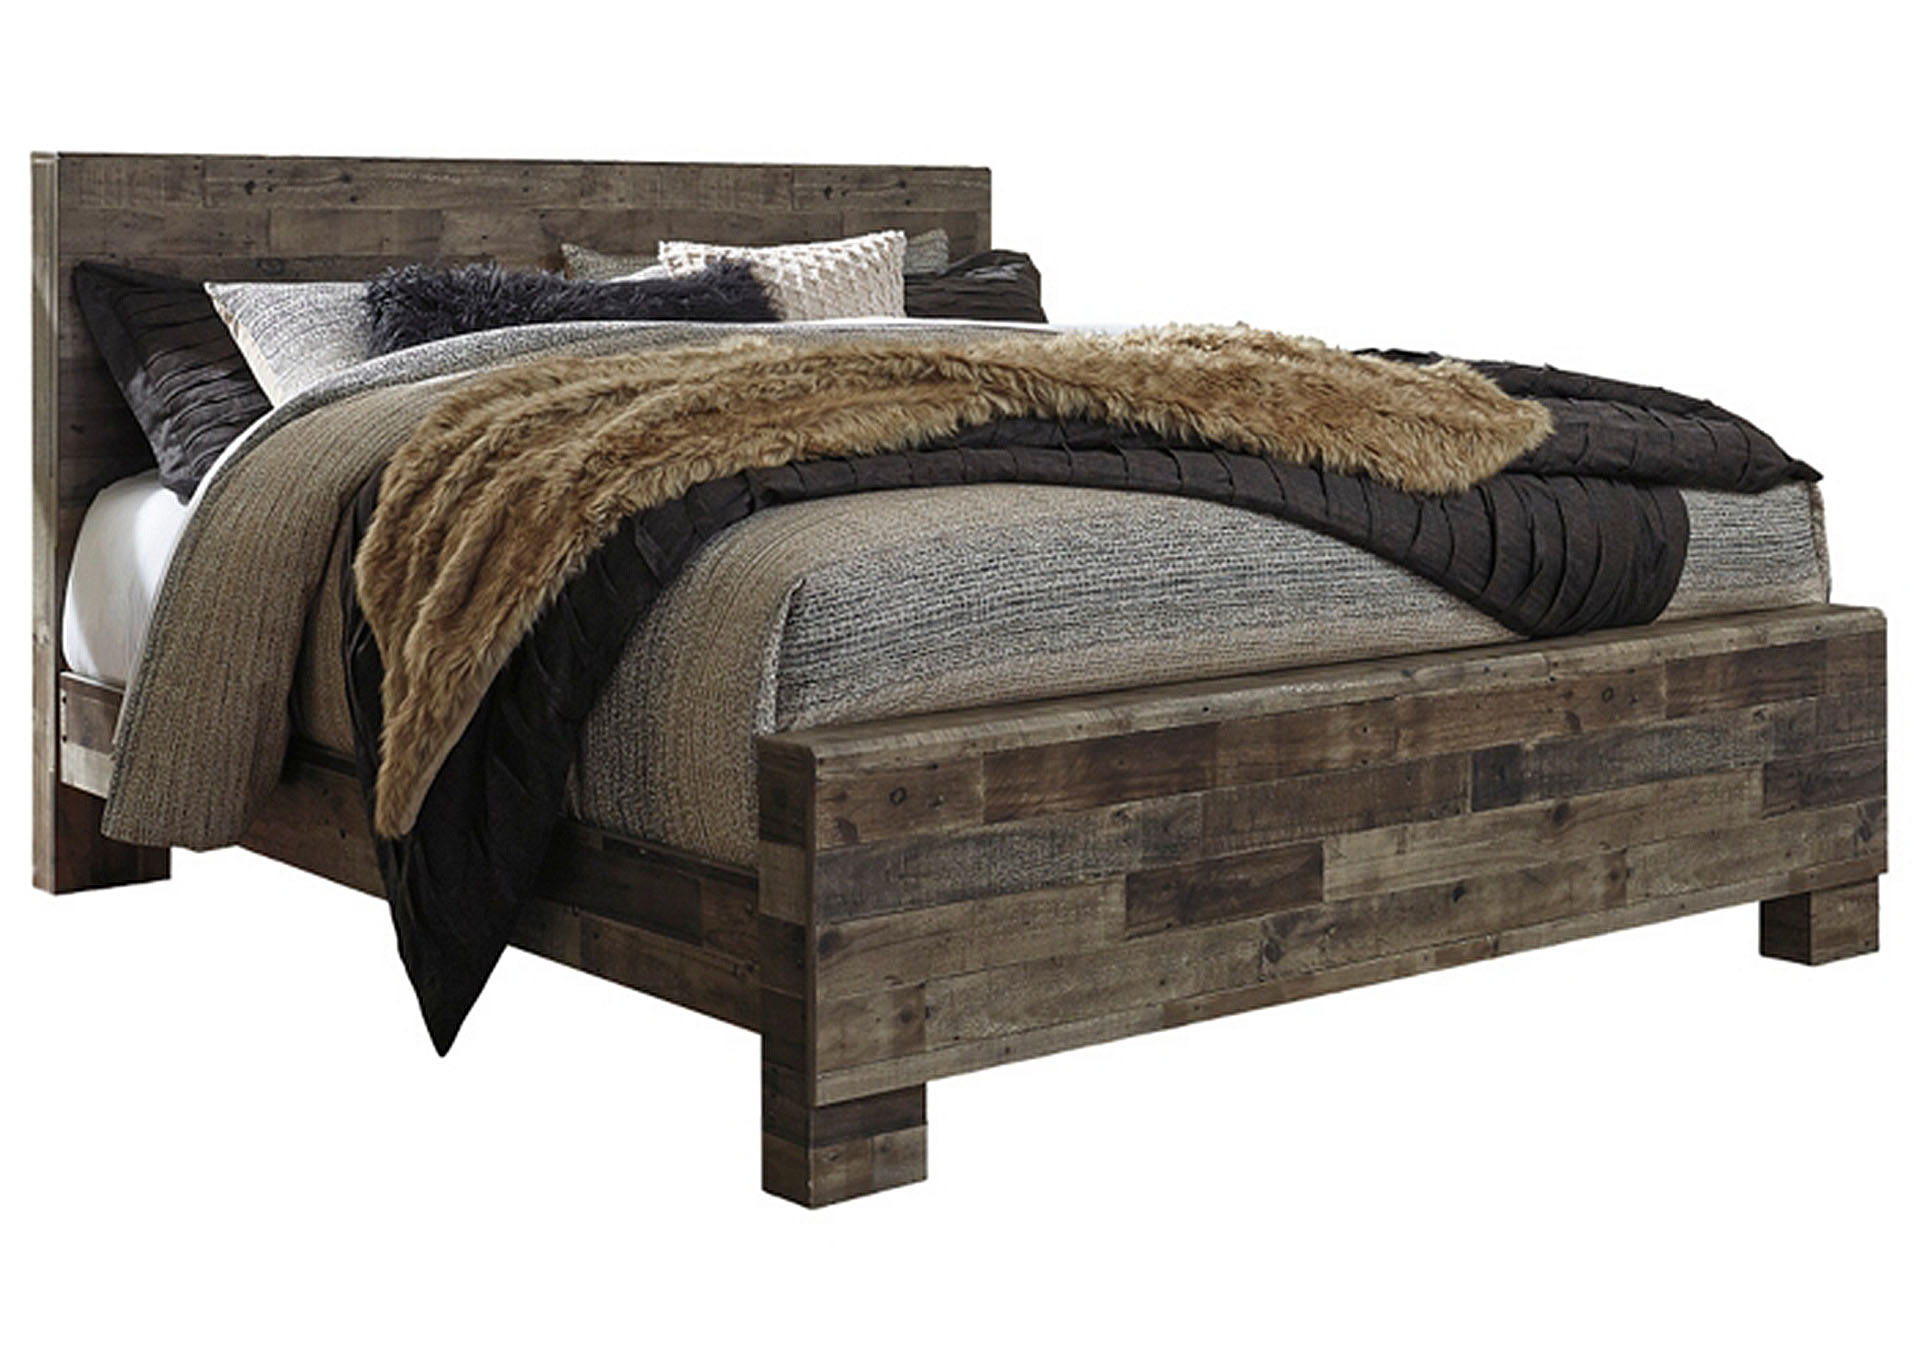 Son King Panel Bed Ivan Smith, Panel King Bed